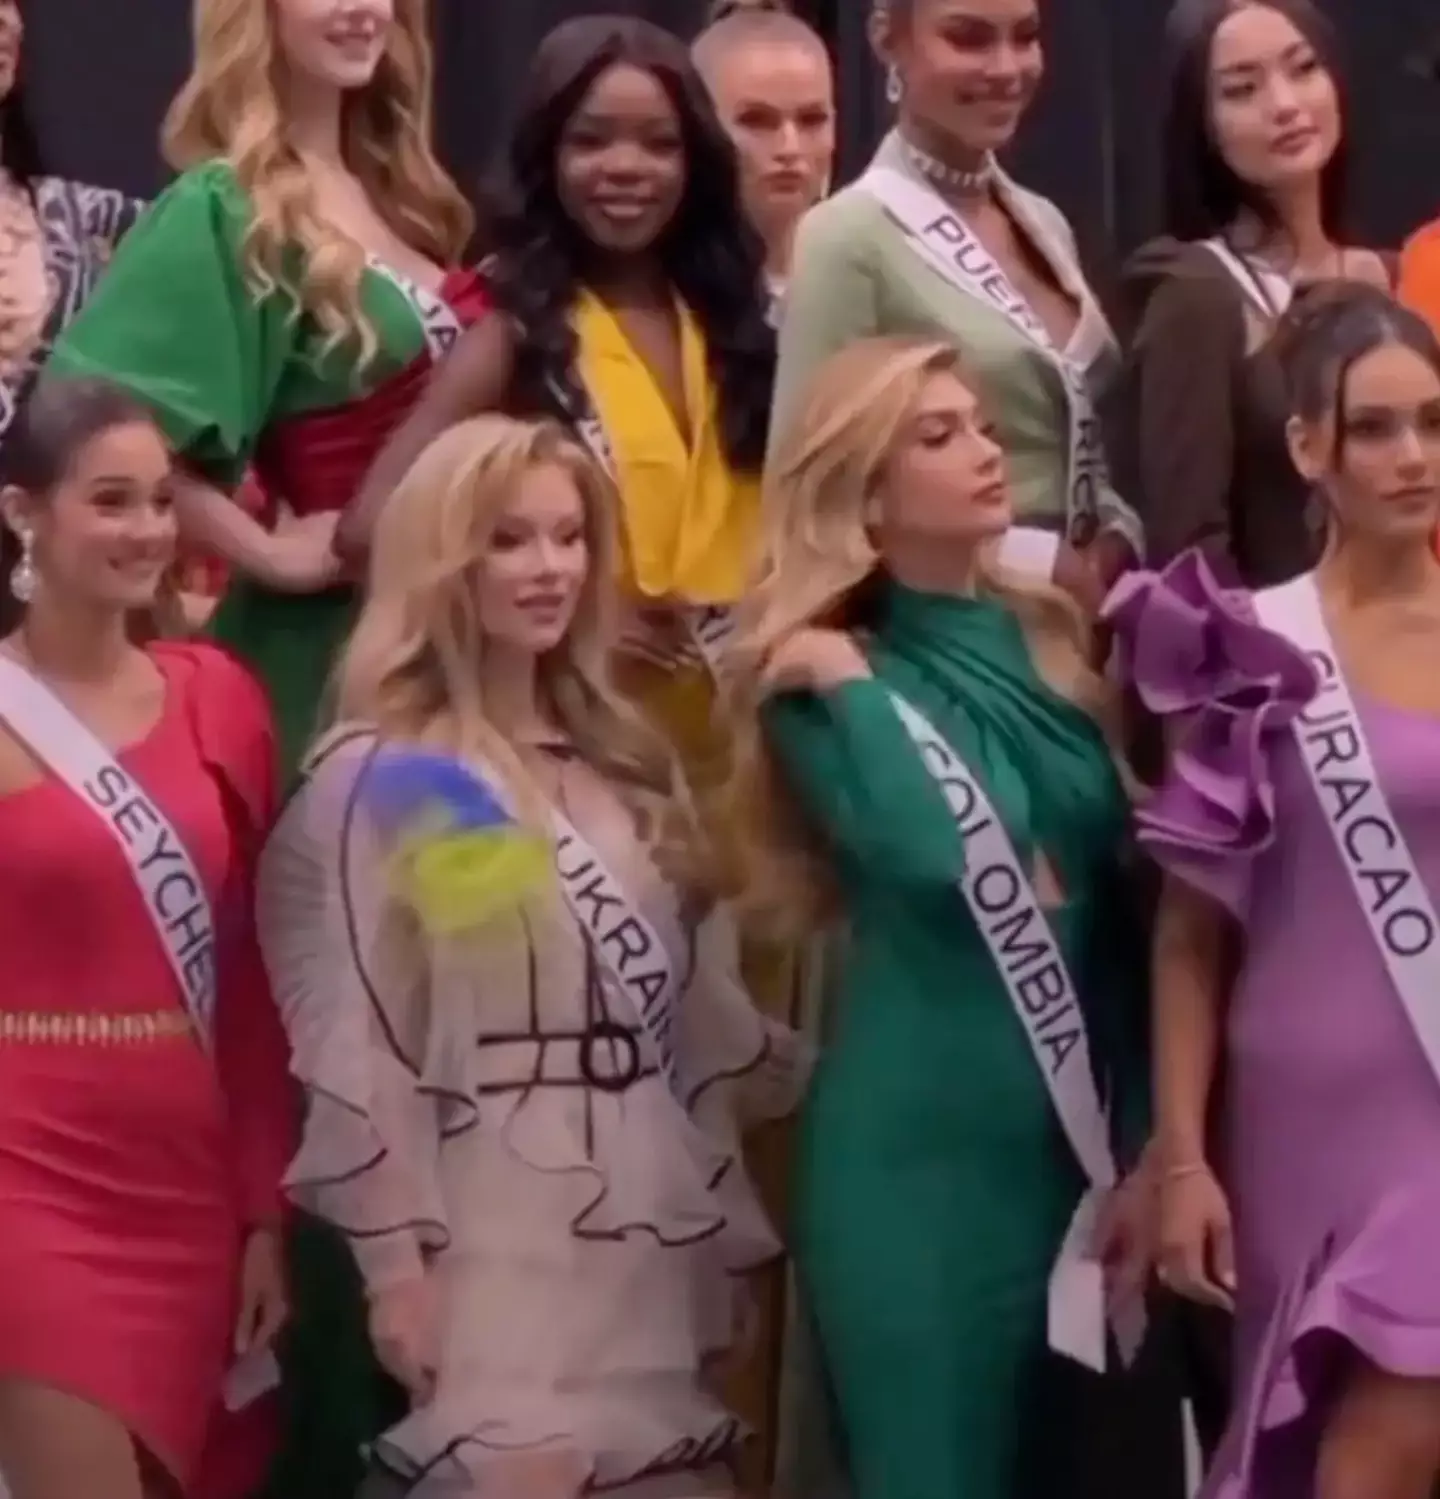 They ended up switching places with Miss Colombia.